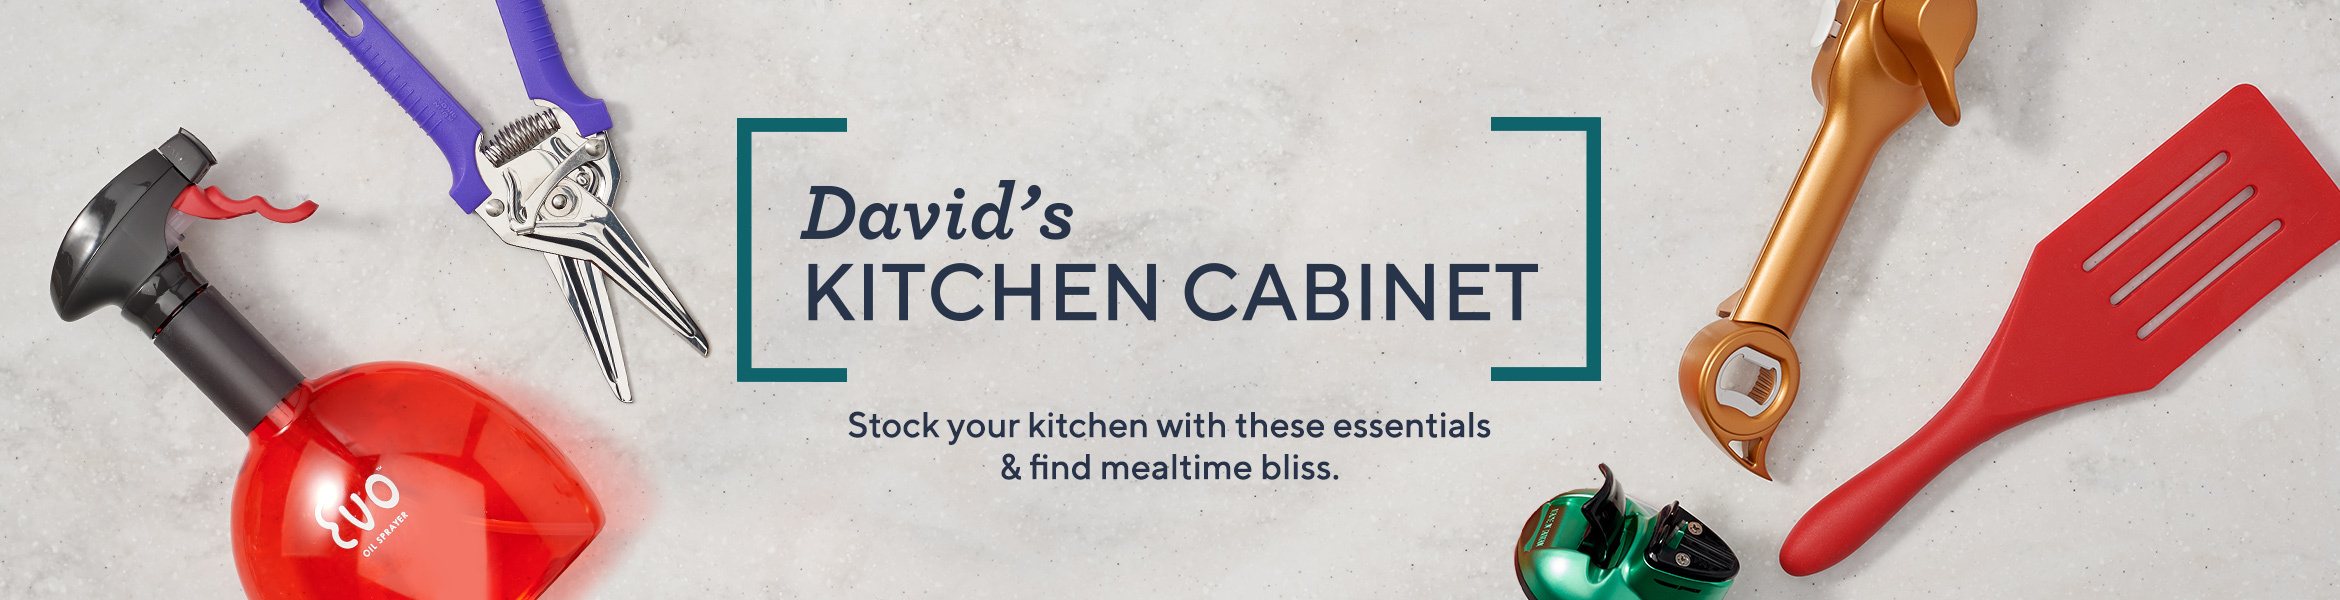 David's Kitchen Cabinet   Stock your kitchen with these essentials & find mealtime bliss. 